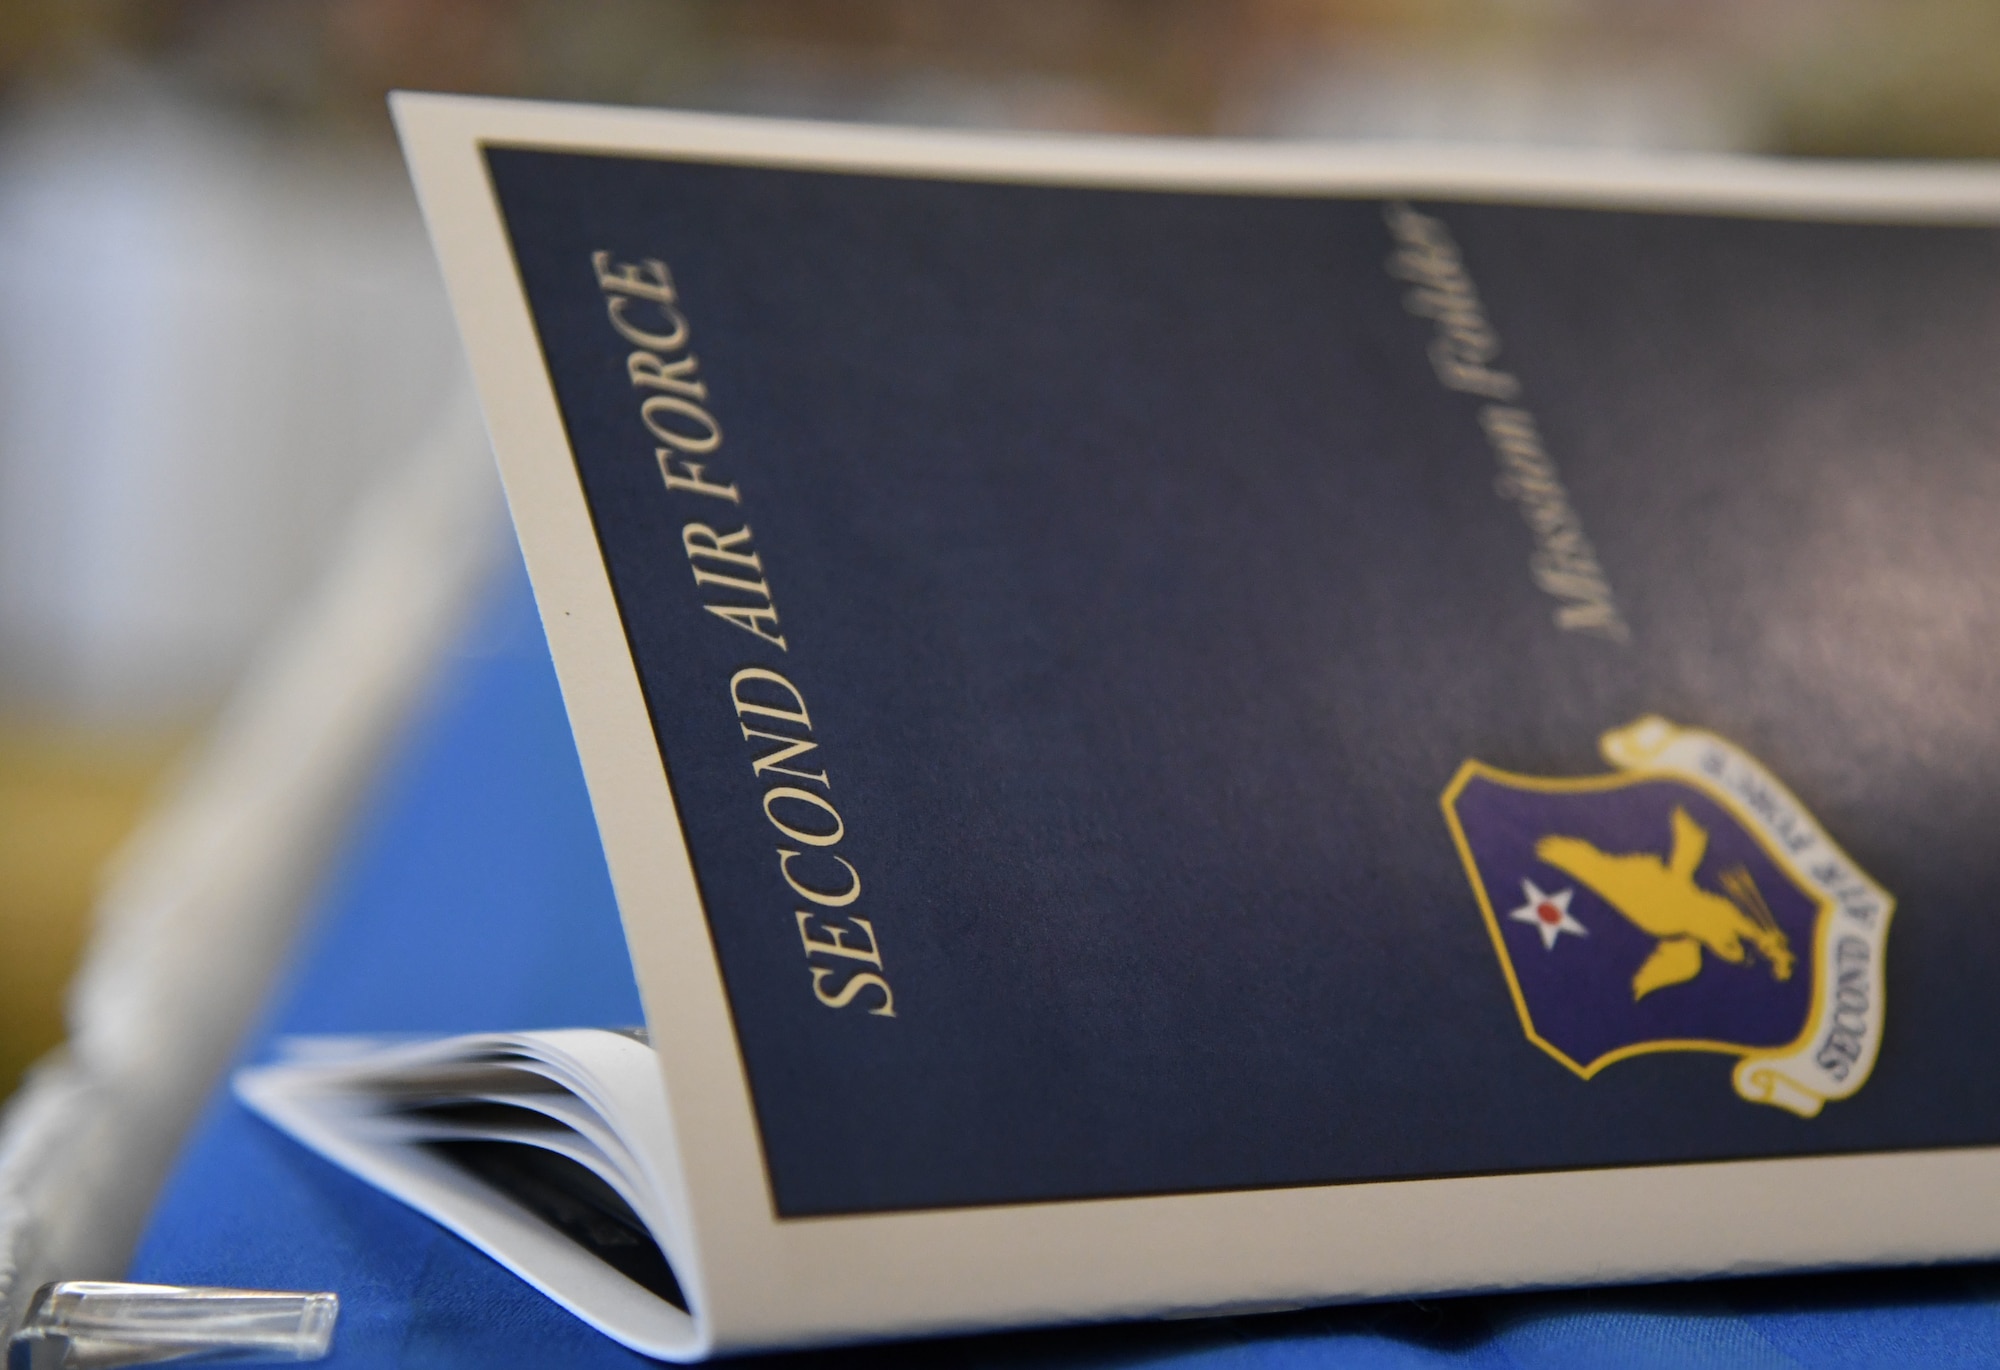 A pamphlet is on display during the Second Air Force Technical Training-101 Seminar inside the Bay Breeze Event Center at Keesler Air Force Base, Mississippi, Oct. 25, 2022.